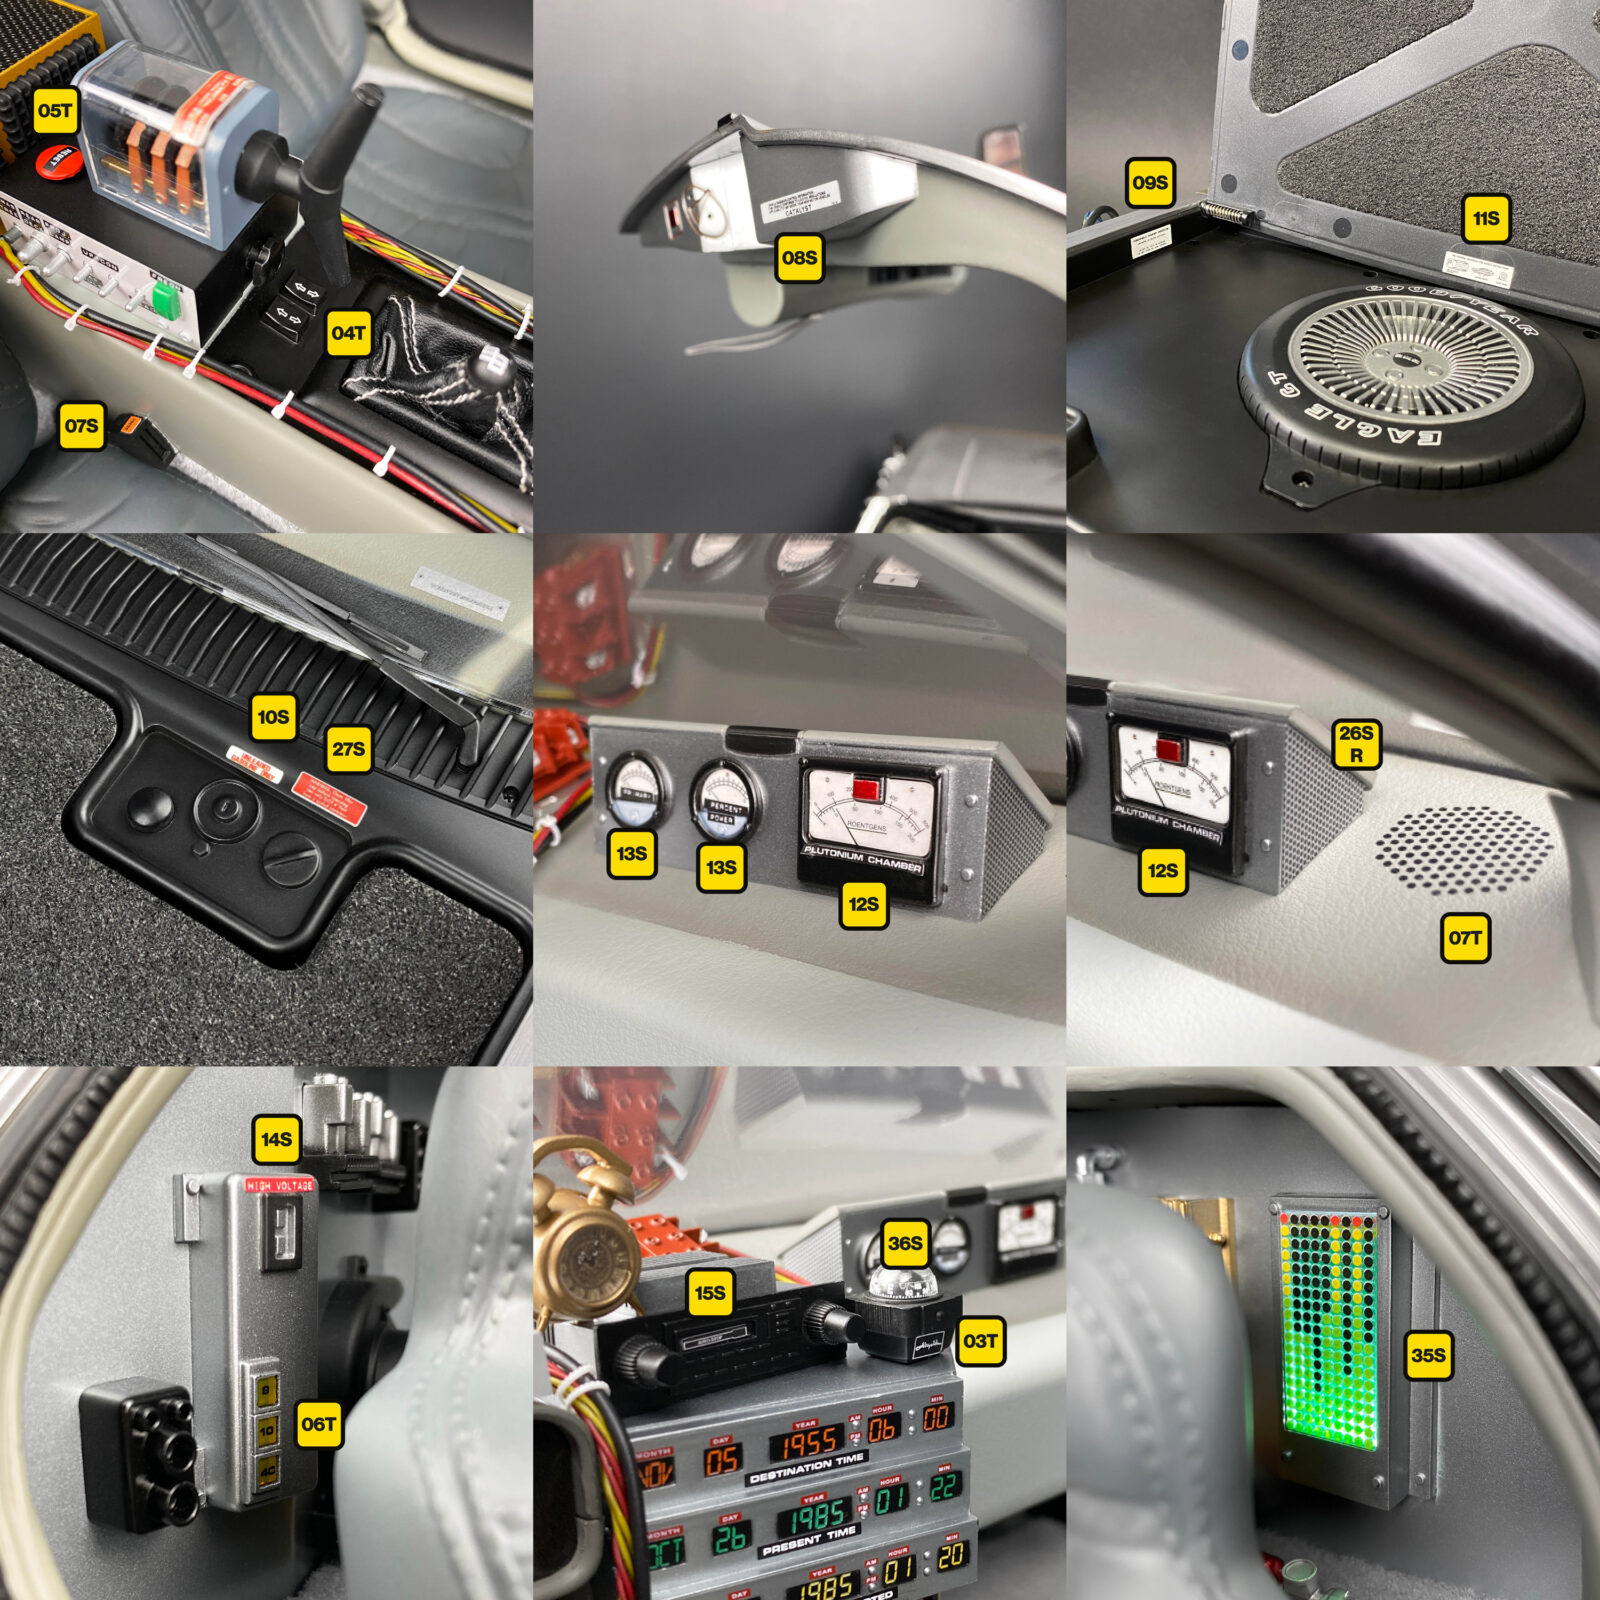 Hot Toys DeLorean Stickers and Transfers for control panels and more